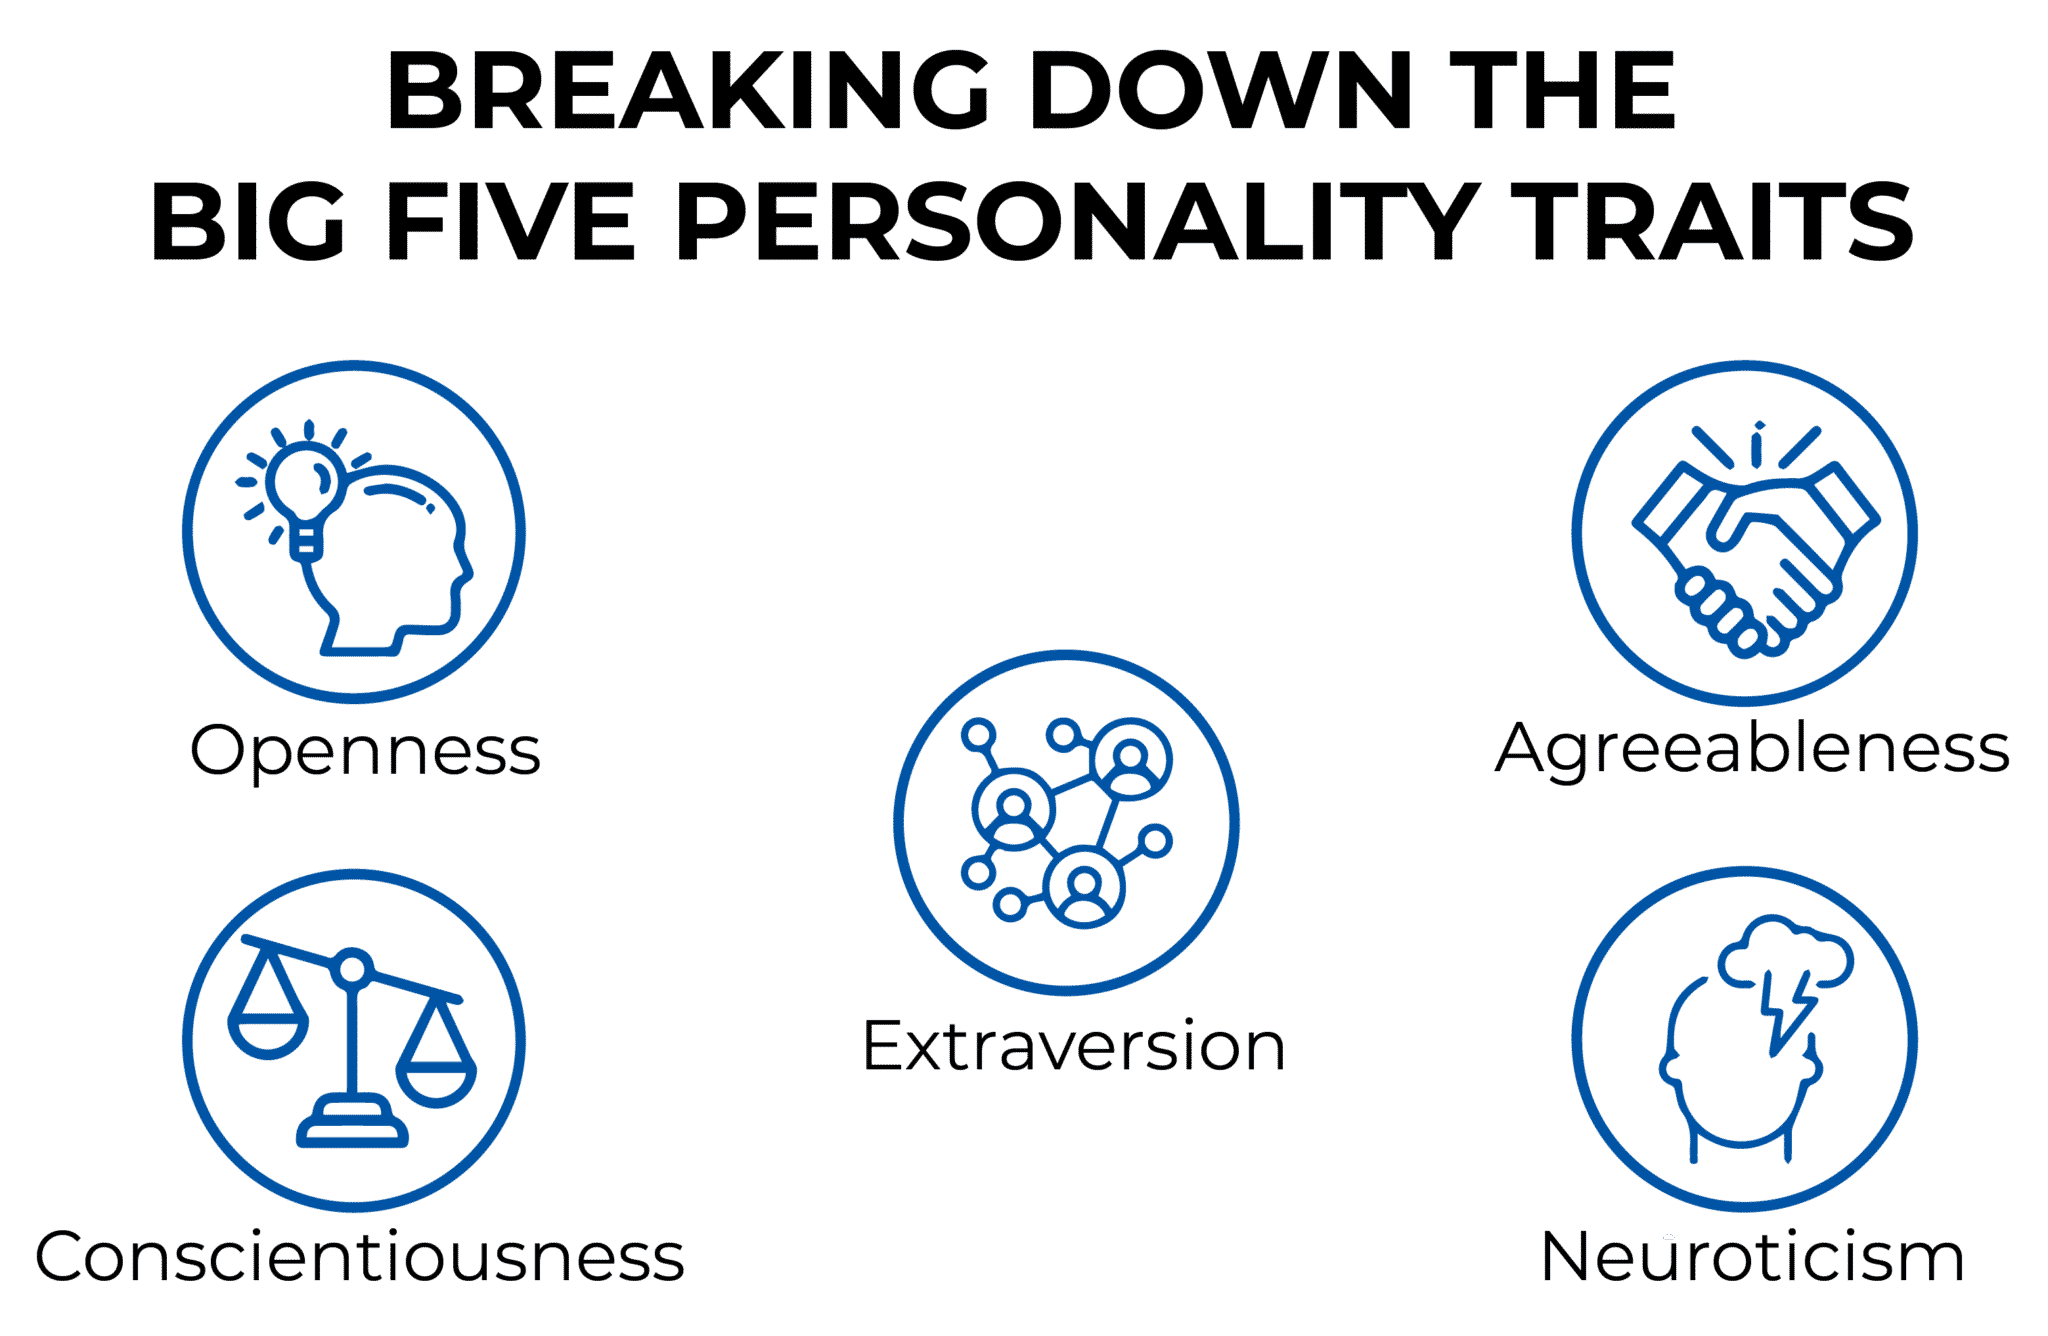 BREAKING DOWN  THE BIG FIVE PERSONALITY TRAITS